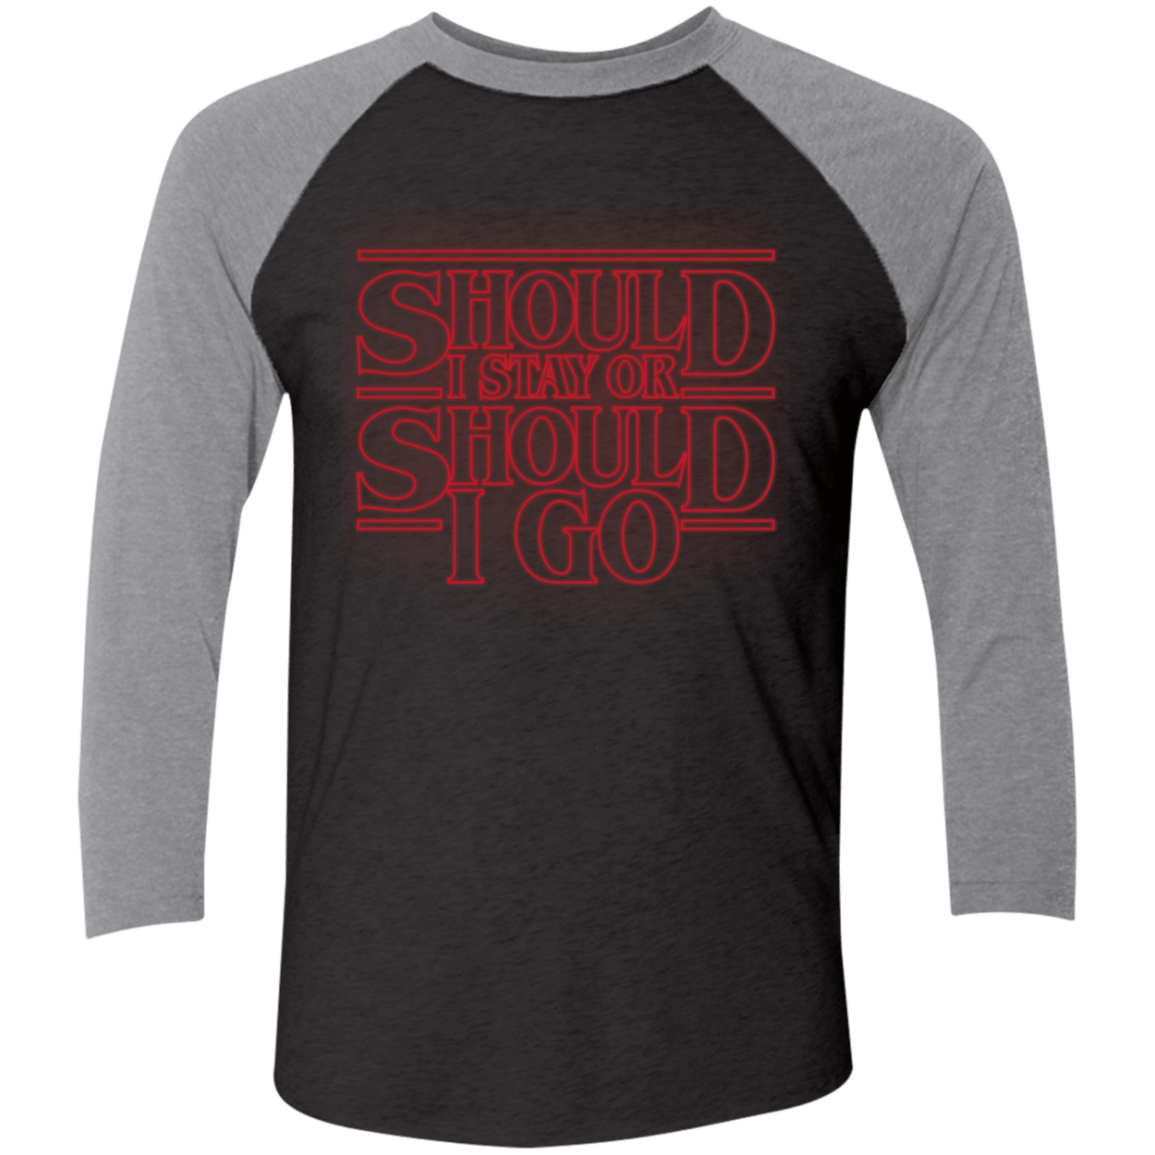 T-Shirts Vintage Black/Premium Heather / X-Small Should I Stay Or Should I Go Triblend 3/4 Sleeve